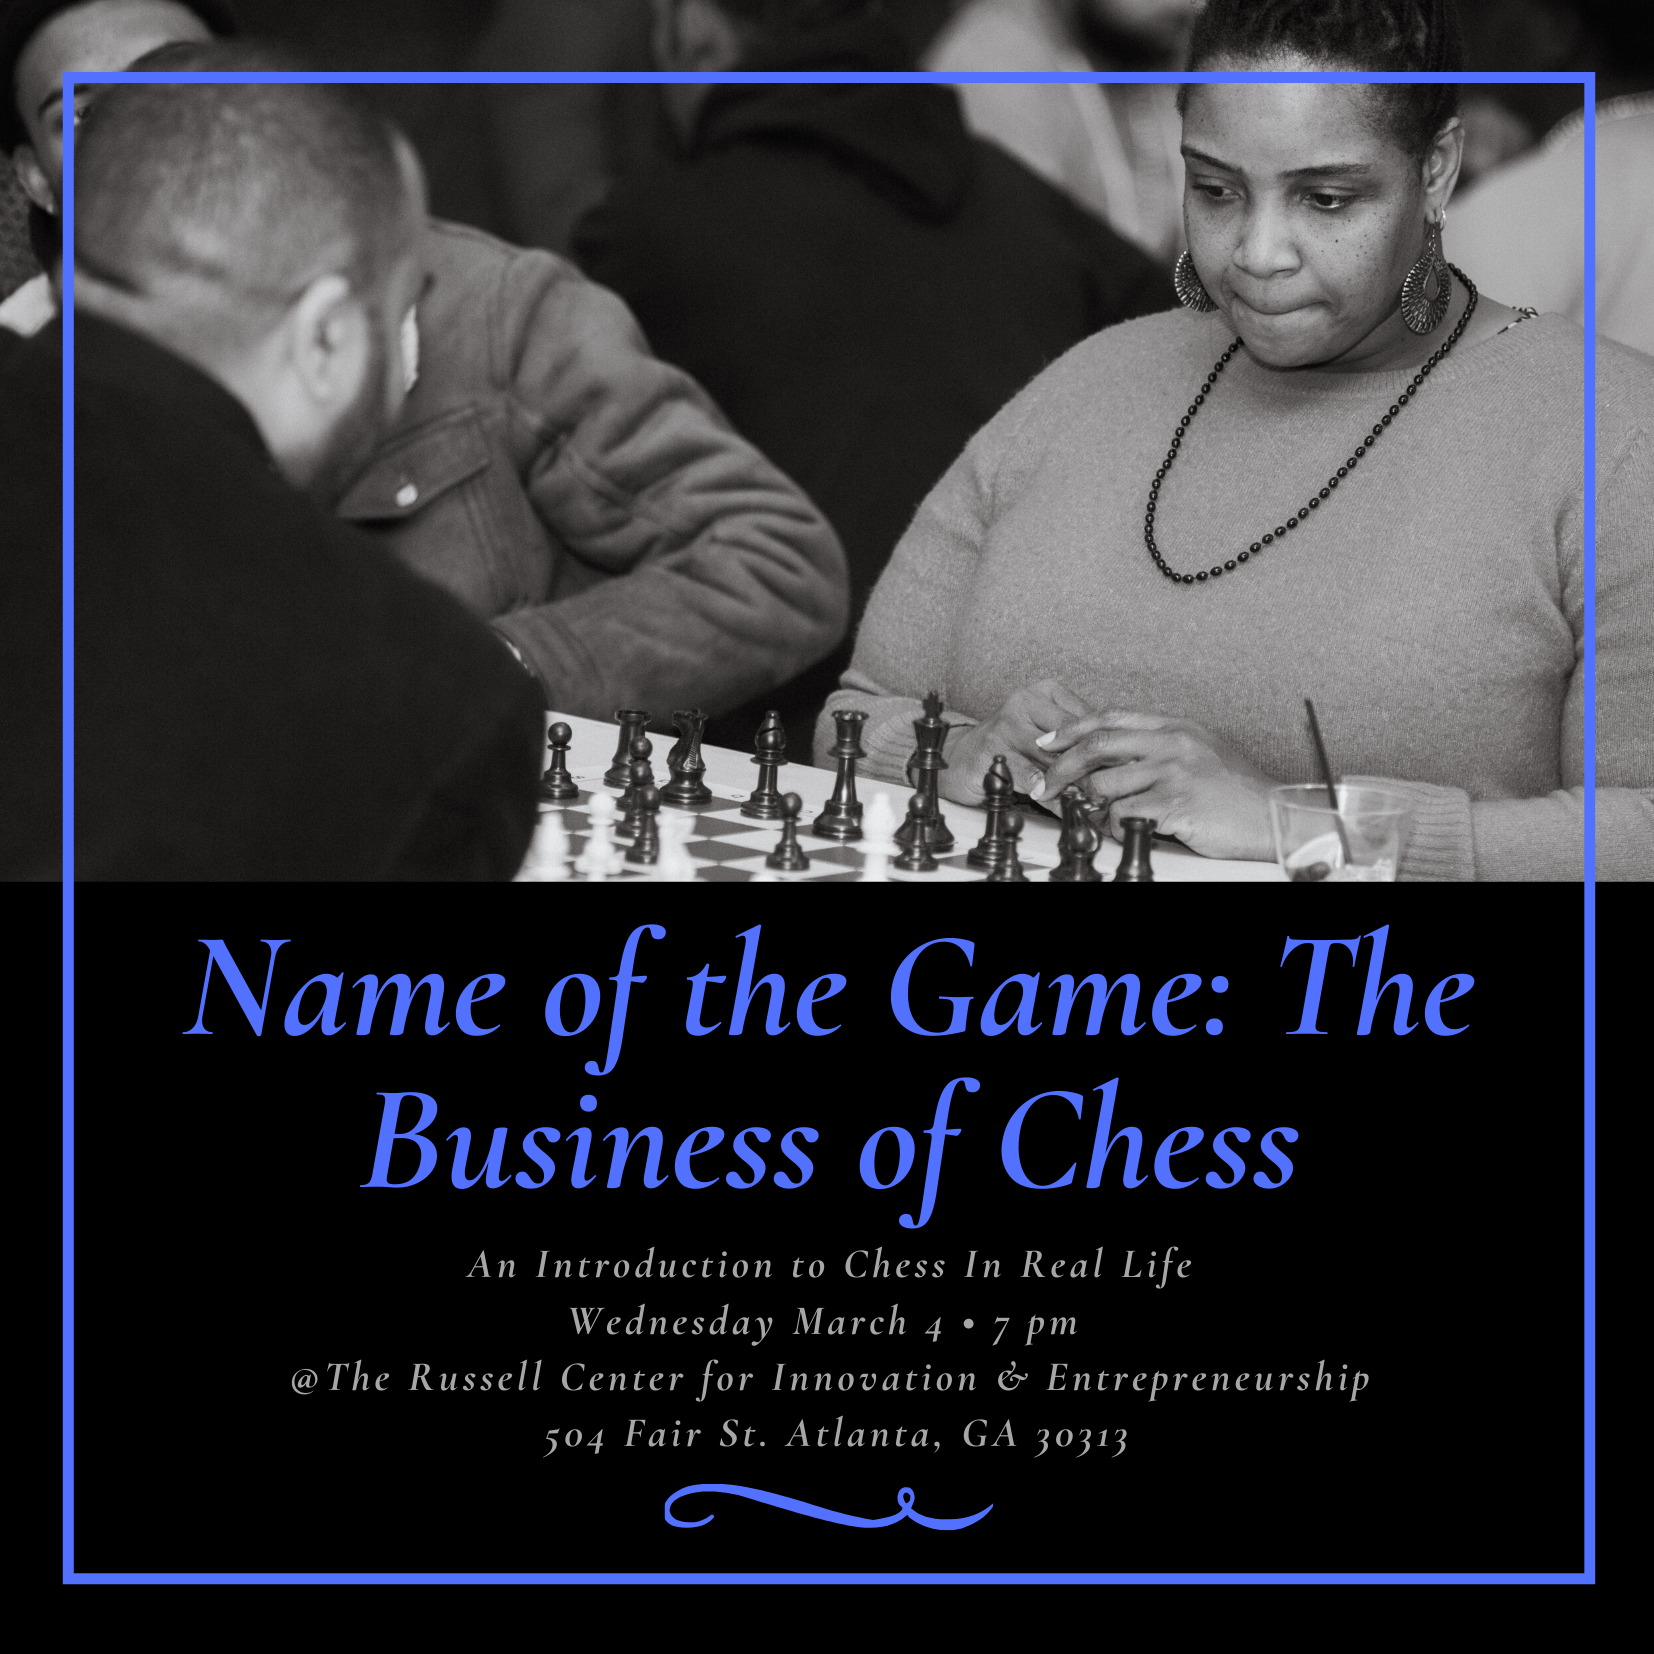 Name of the Game: The Business of Chess